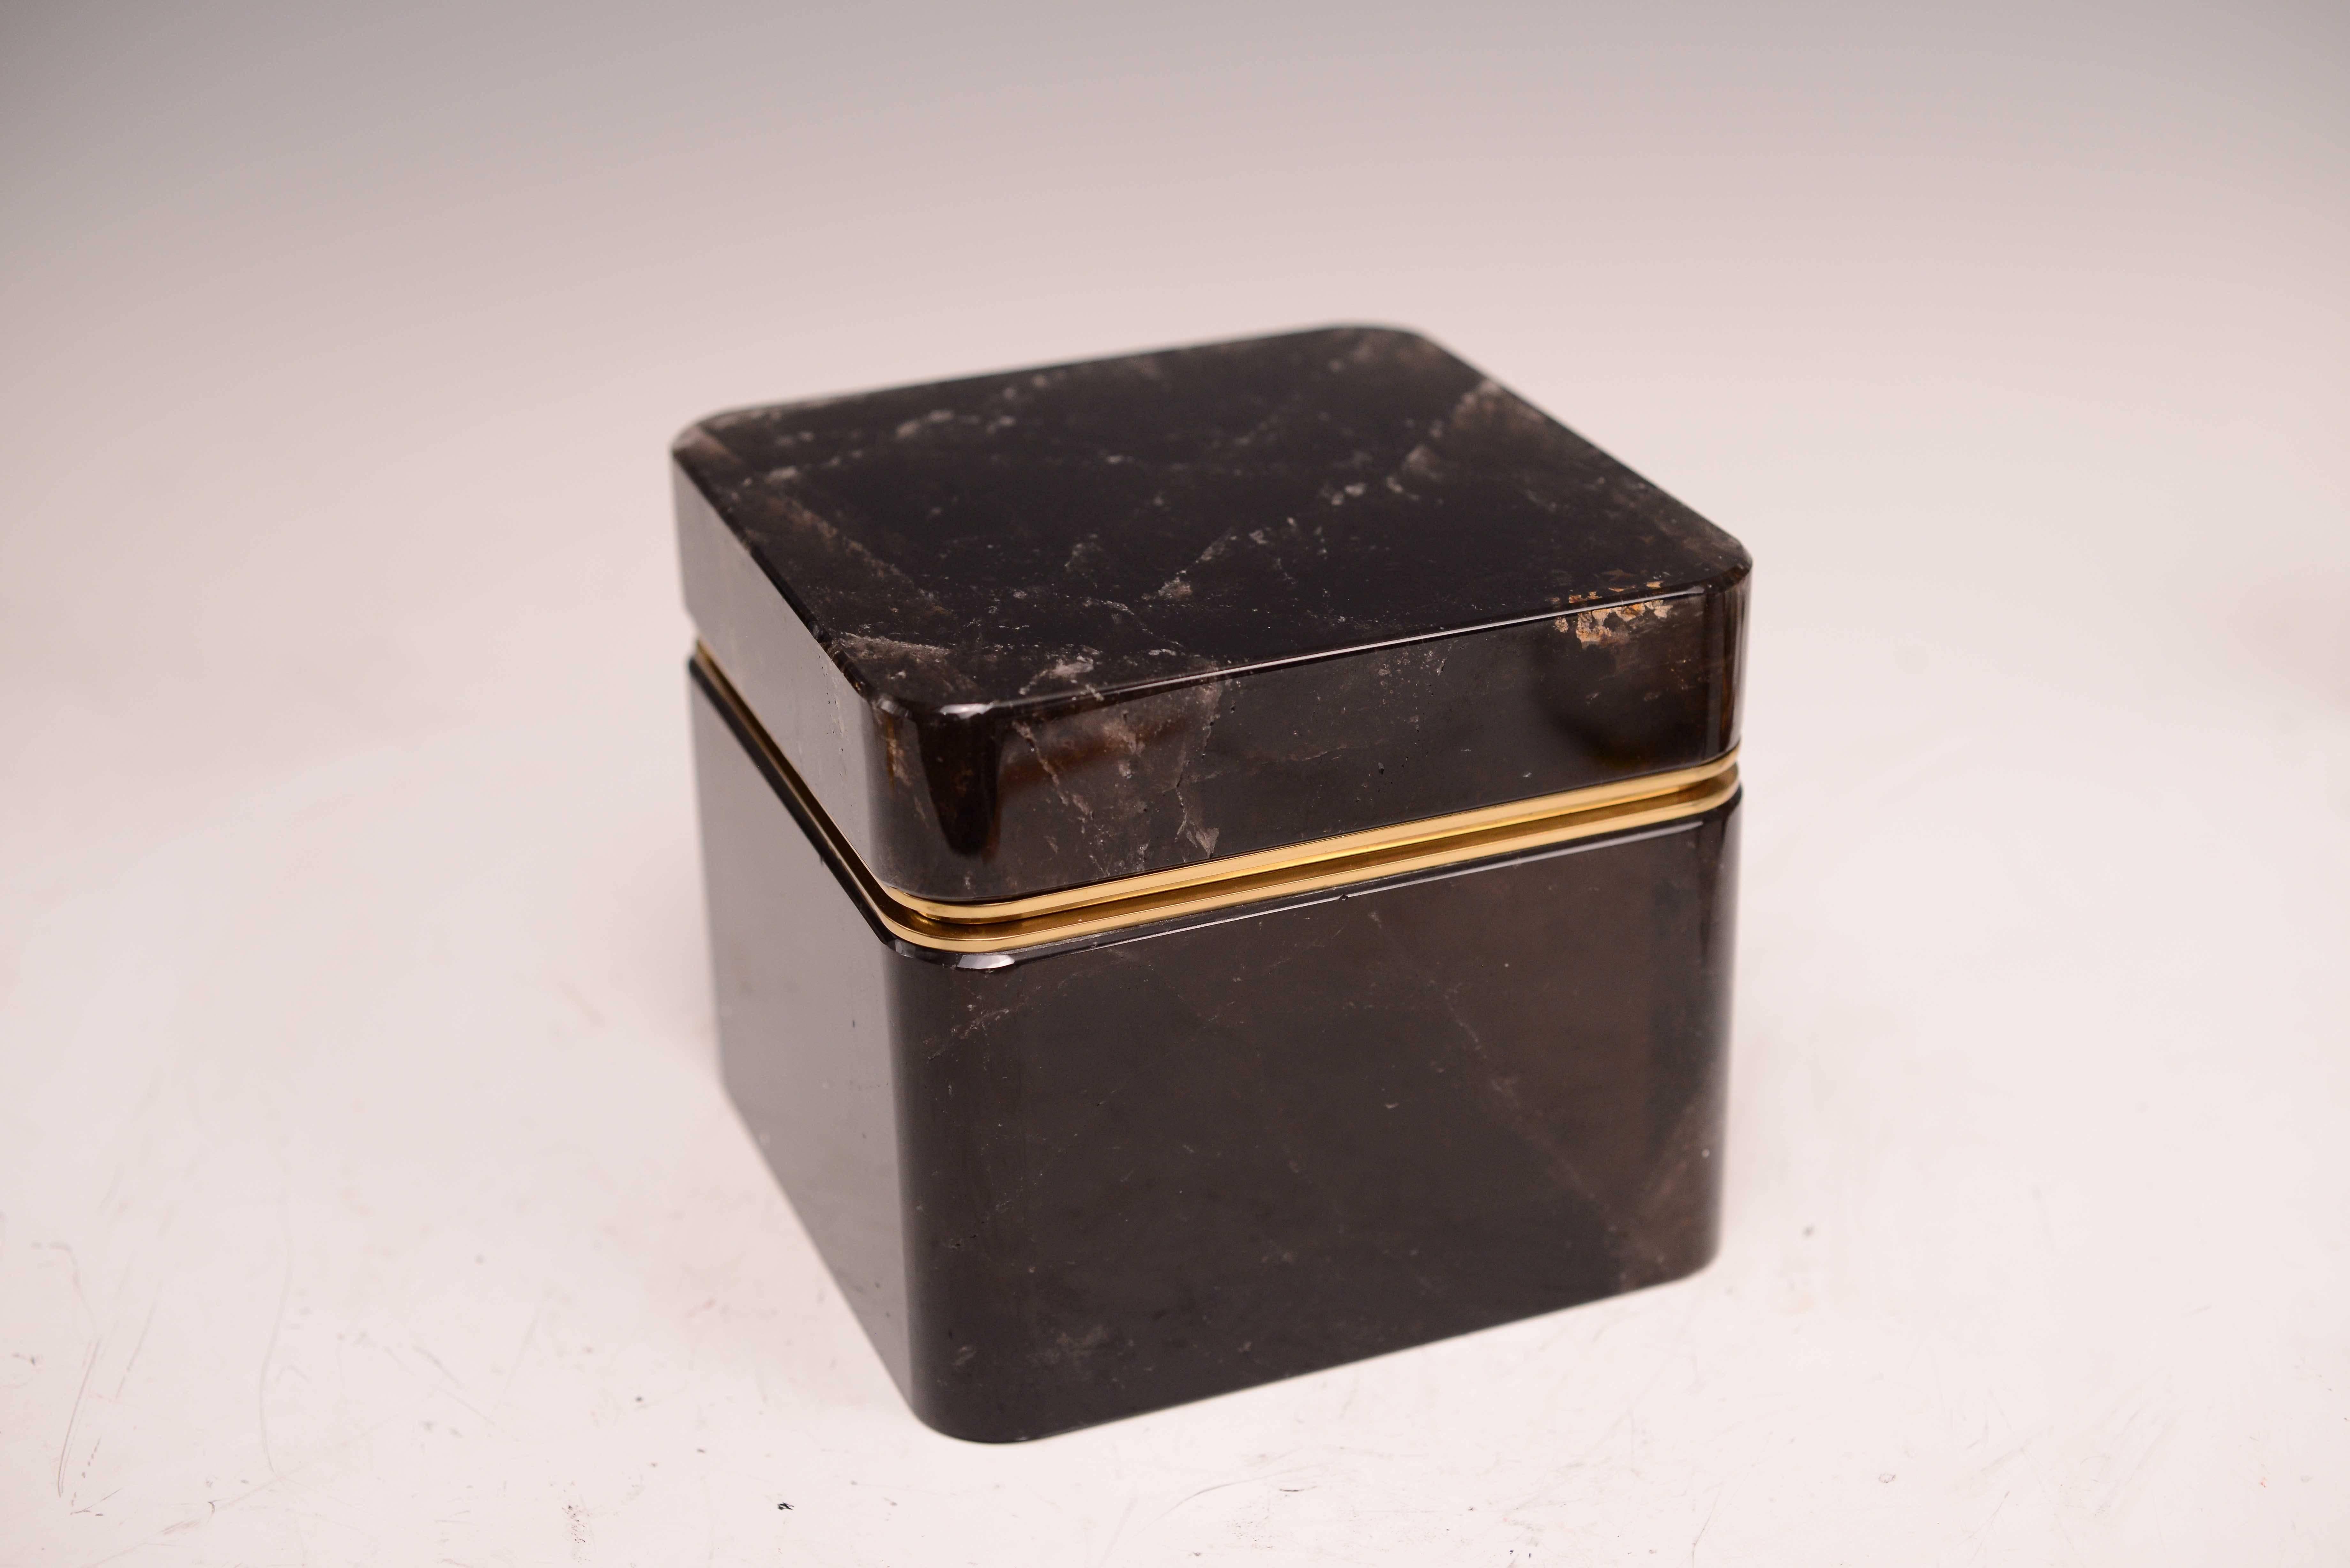 Dark brown square rock crystal box with cover.
